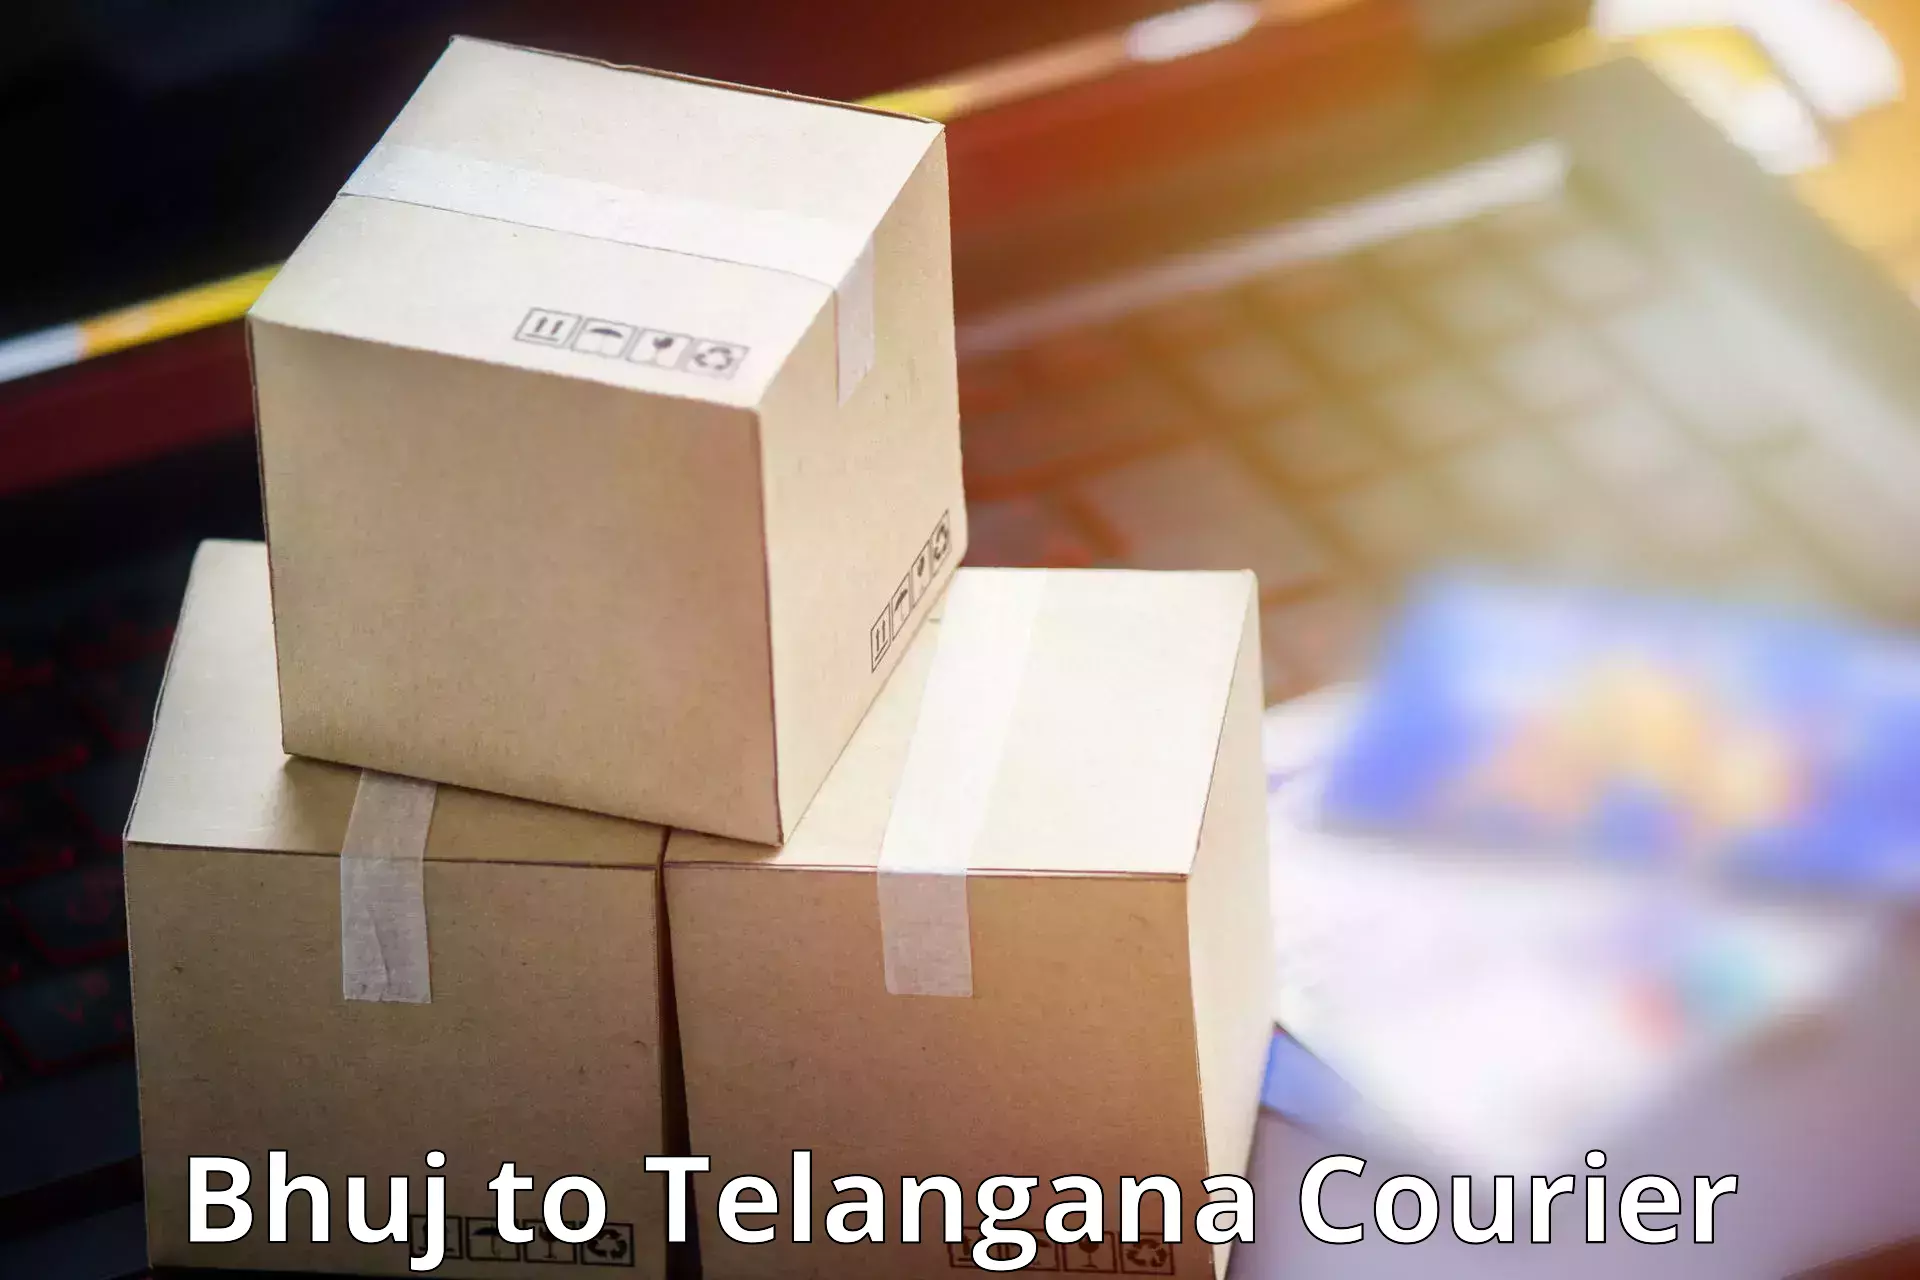 Courier service comparison Bhuj to Manthani